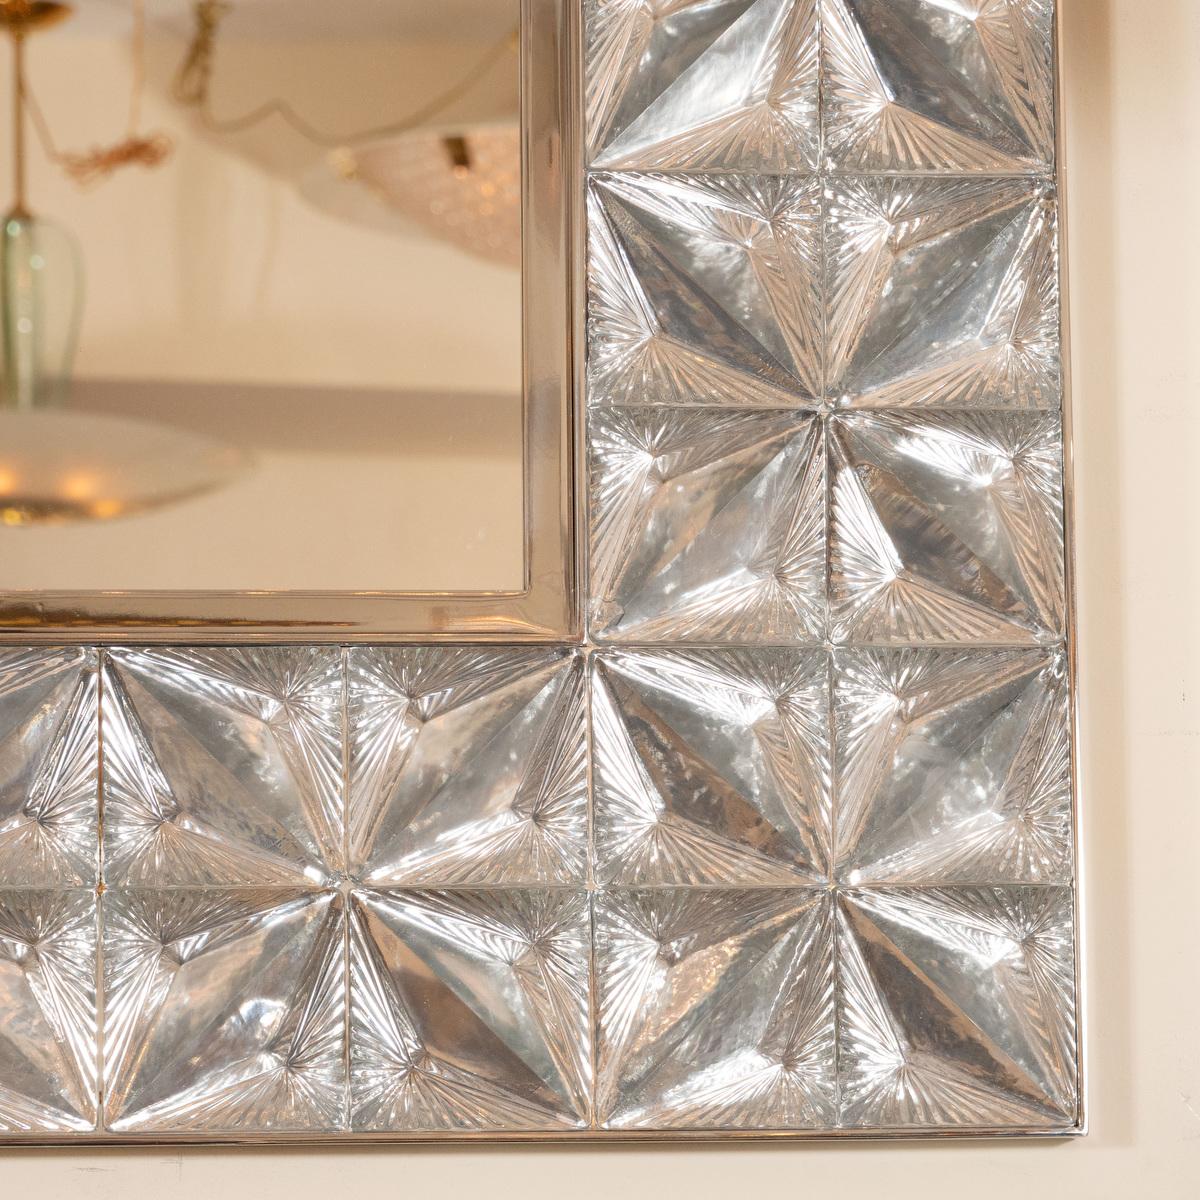 Large rectangular nickel mirror with star patterned glass surround.
Different size and color options available.